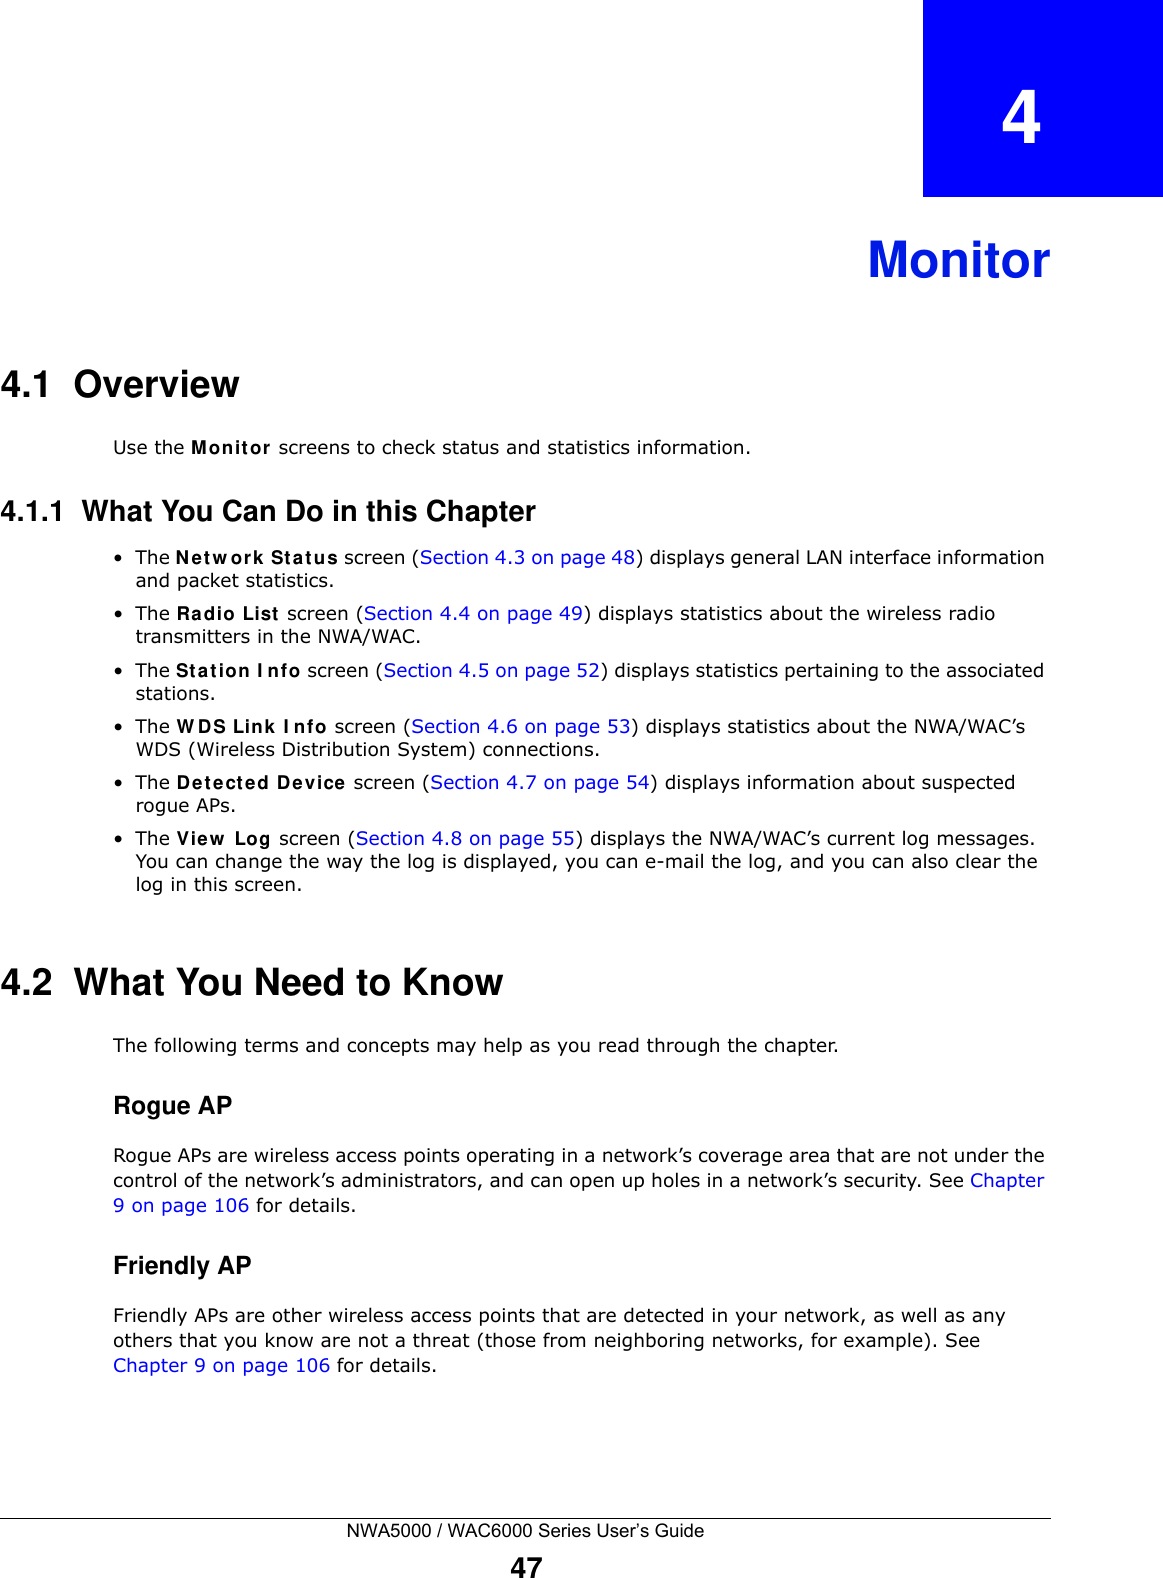 NWA5000 / WAC6000 Series User’s Guide47CHAPTER   4Monitor4.1  OverviewUse the M onit or screens to check status and statistics information.4.1.1  What You Can Do in this Chapter•The N et w ork  St a tus screen (Section 4.3 on page 48) displays general LAN interface information and packet statistics. •The Ra dio List  screen (Section 4.4 on page 49) displays statistics about the wireless radio transmitters in the NWA/WAC.•The St a tion  I n fo screen (Section 4.5 on page 52) displays statistics pertaining to the associated stations.•The W D S Link I nfo screen (Section 4.6 on page 53) displays statistics about the NWA/WAC’s WDS (Wireless Distribution System) connections.•The De te ct e d De vice screen (Section 4.7 on page 54) displays information about suspected rogue APs.•The View  Log screen (Section 4.8 on page 55) displays the NWA/WAC’s current log messages. You can change the way the log is displayed, you can e-mail the log, and you can also clear the log in this screen.4.2  What You Need to KnowThe following terms and concepts may help as you read through the chapter.Rogue APRogue APs are wireless access points operating in a network’s coverage area that are not under the control of the network’s administrators, and can open up holes in a network’s security. See Chapter 9 on page 106 for details.Friendly APFriendly APs are other wireless access points that are detected in your network, as well as any others that you know are not a threat (those from neighboring networks, for example). See Chapter 9 on page 106 for details.